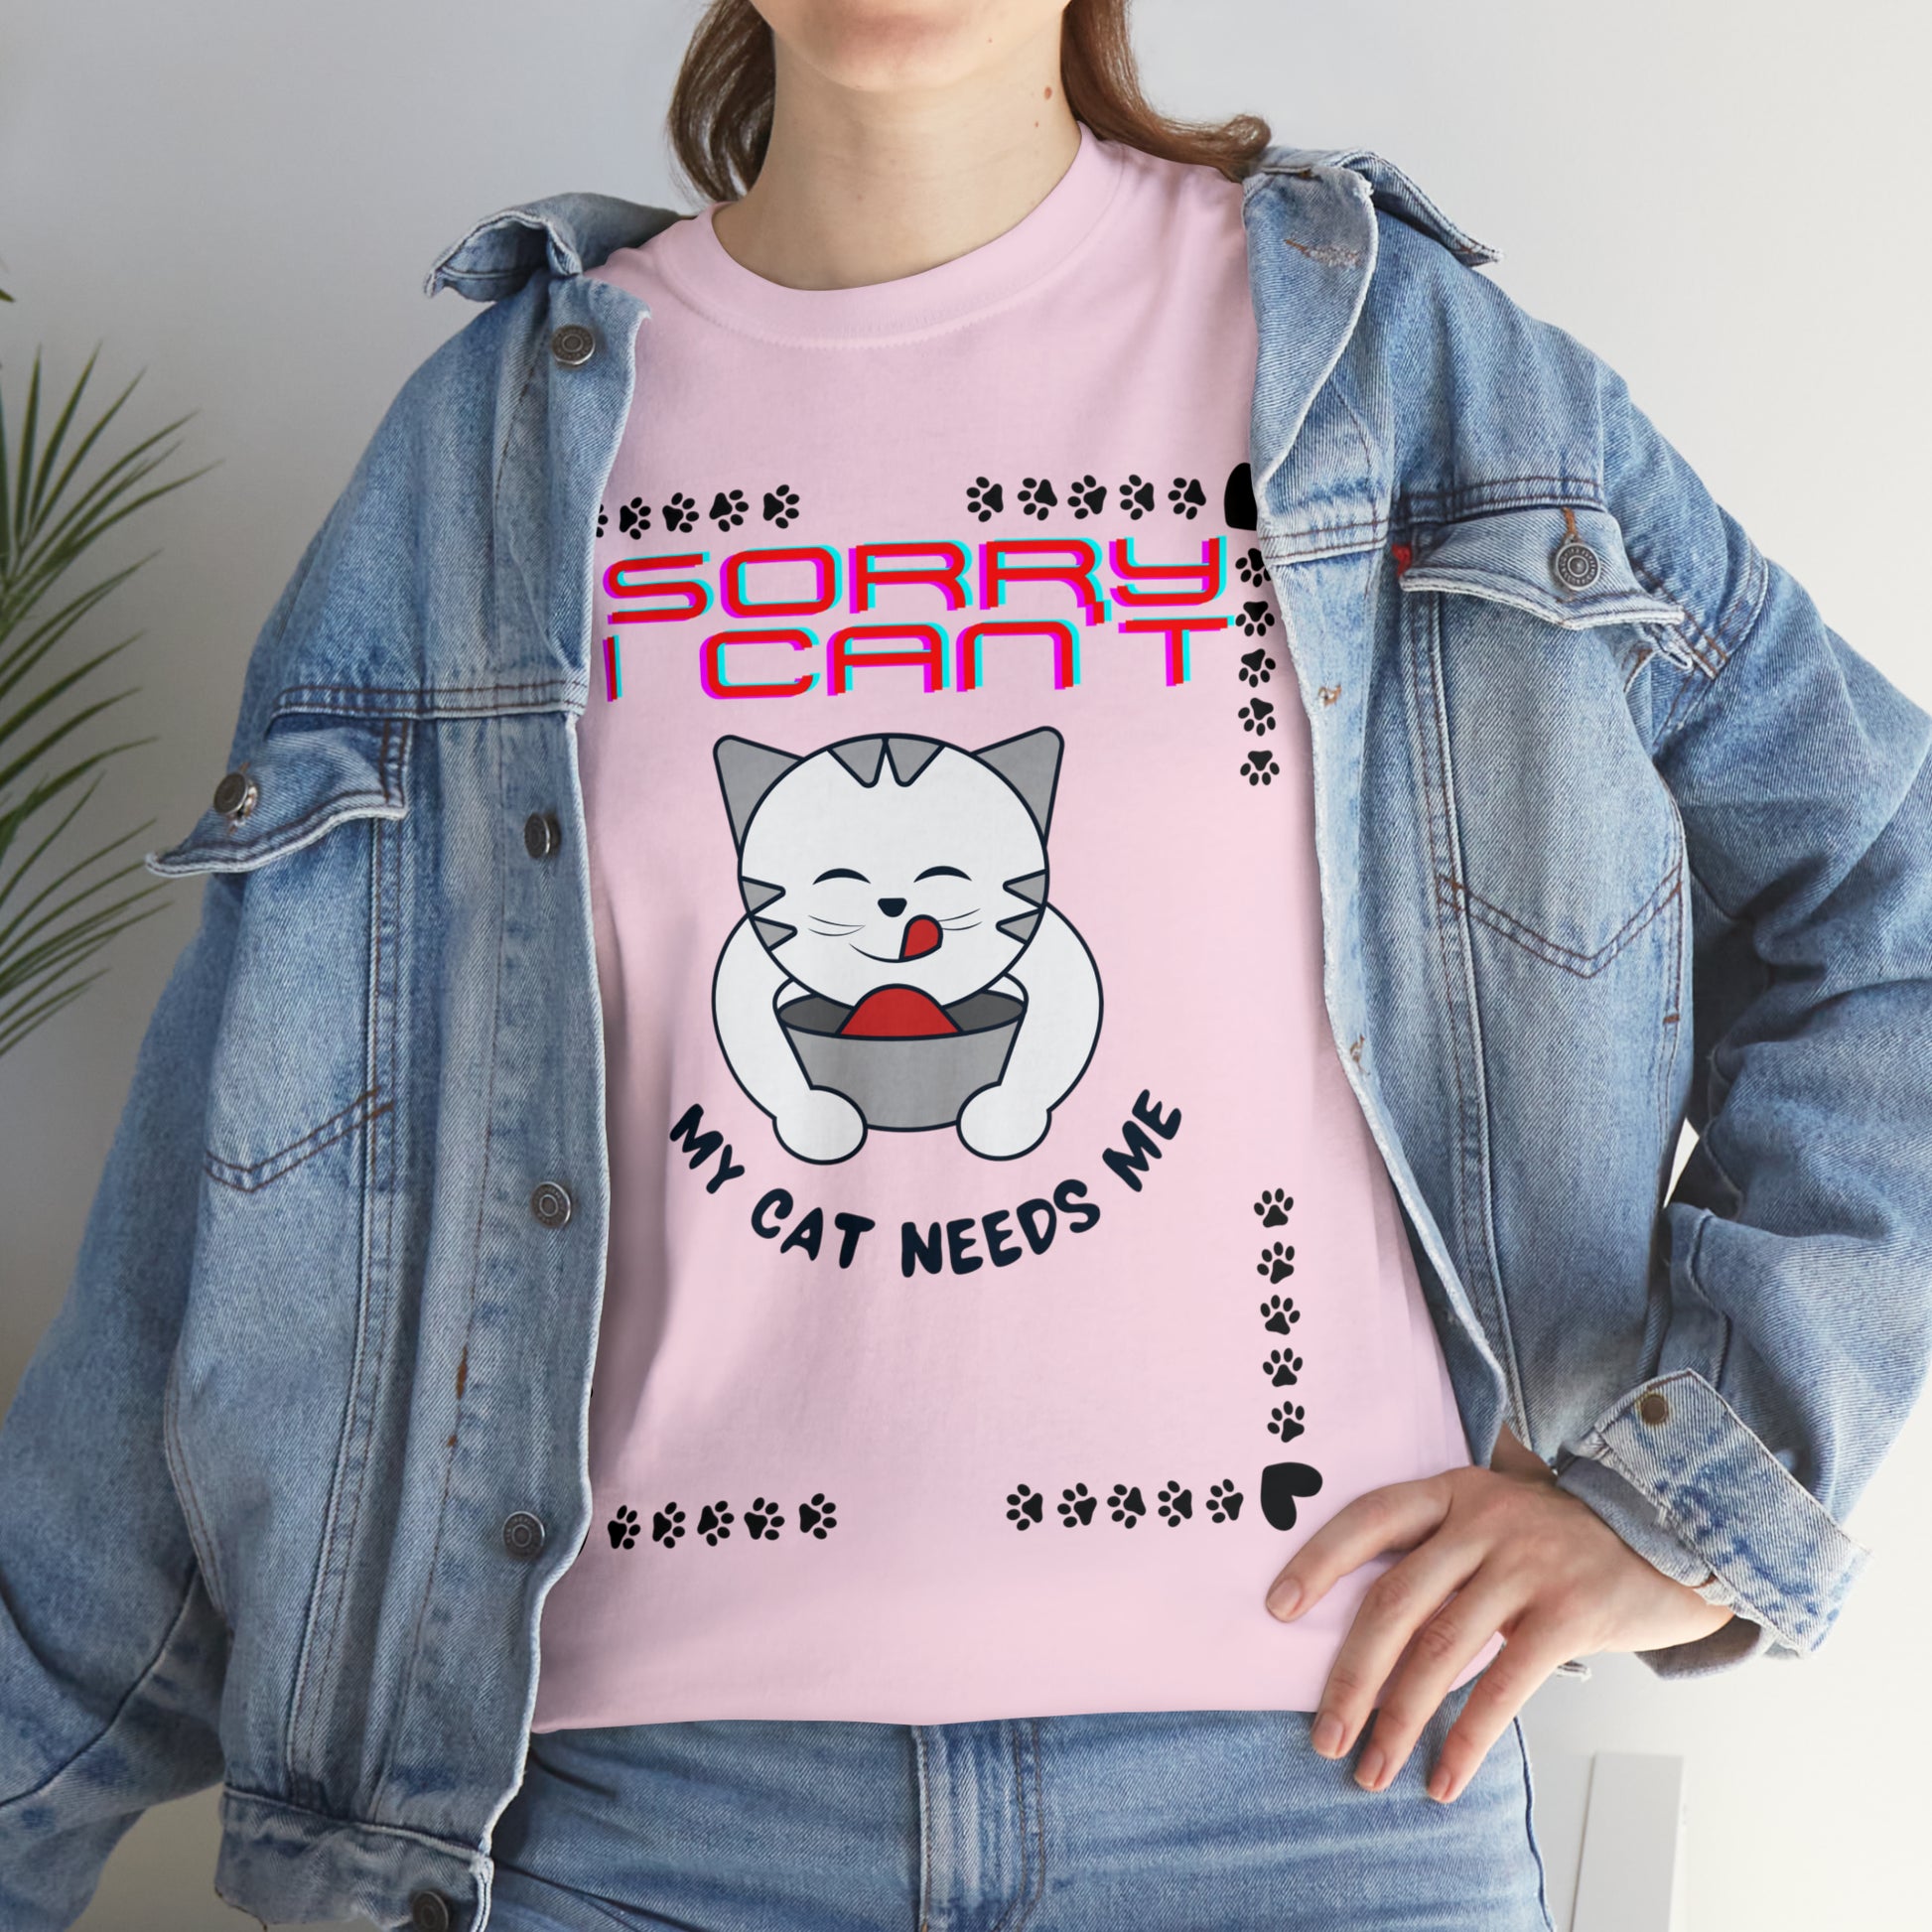 Sorry I Can't My Cat Needs Me T-Shirt | Cat Mom Shirt | Cat Lover Gift | Cat Mom Gift | Animal Lover Gift for Women T-Shirt   